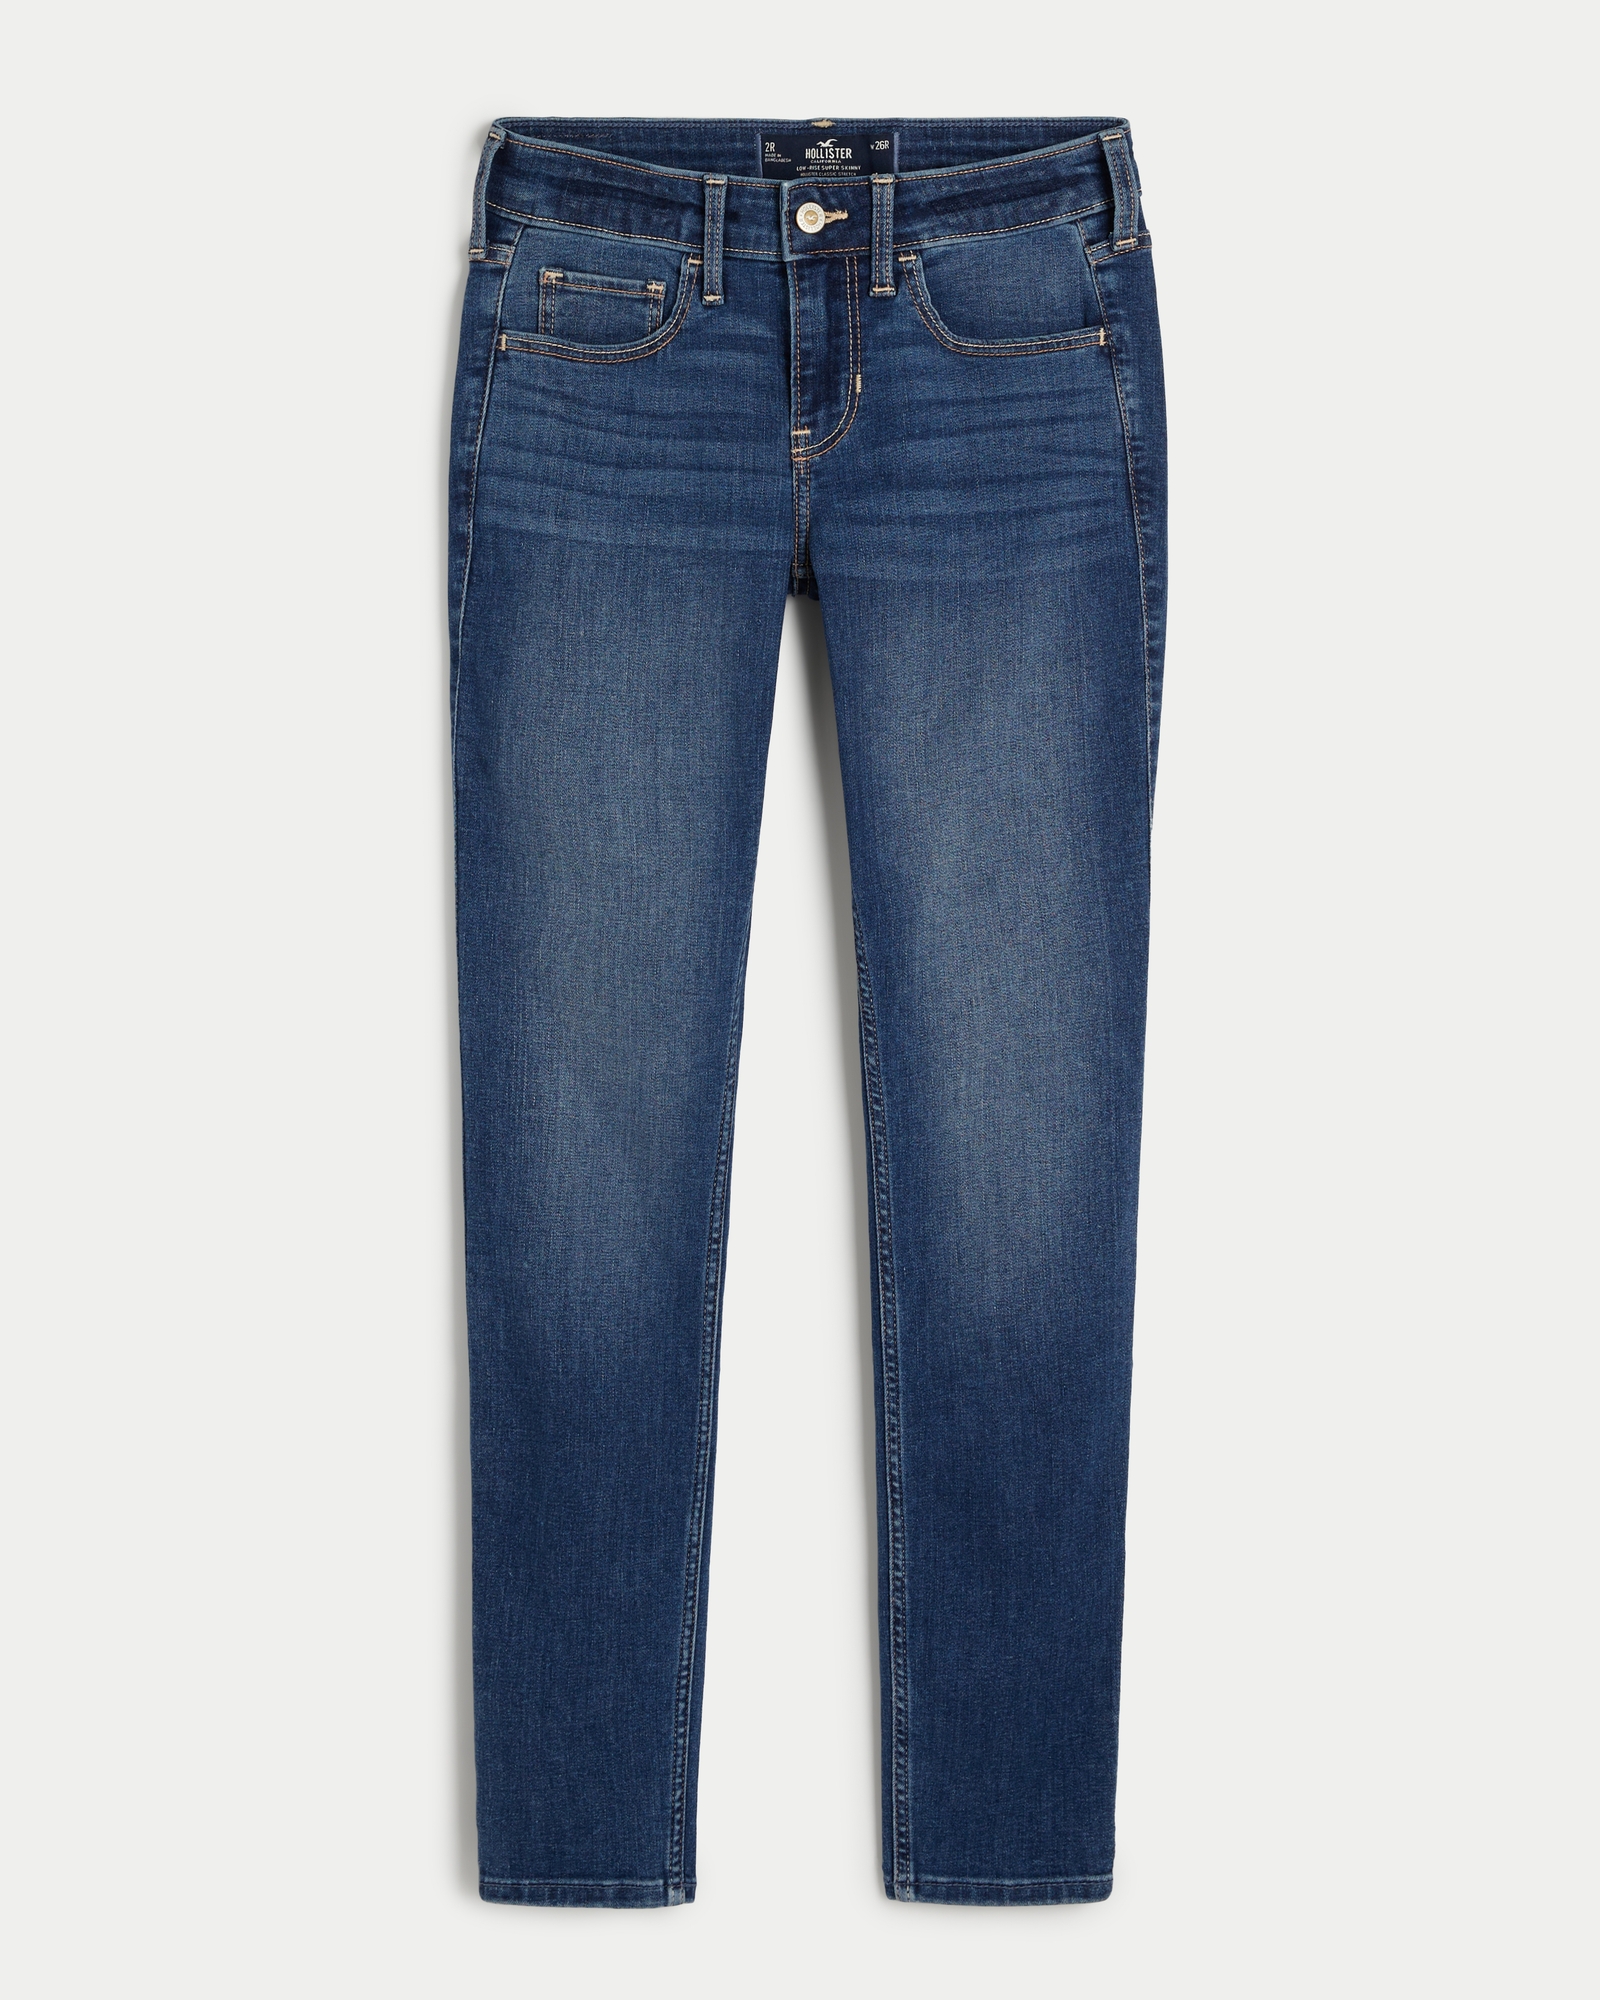 Hollister High Rise Skinny Jeans Jeggings Blue Size 26 - $9 (70% Off  Retail) - From Kaley